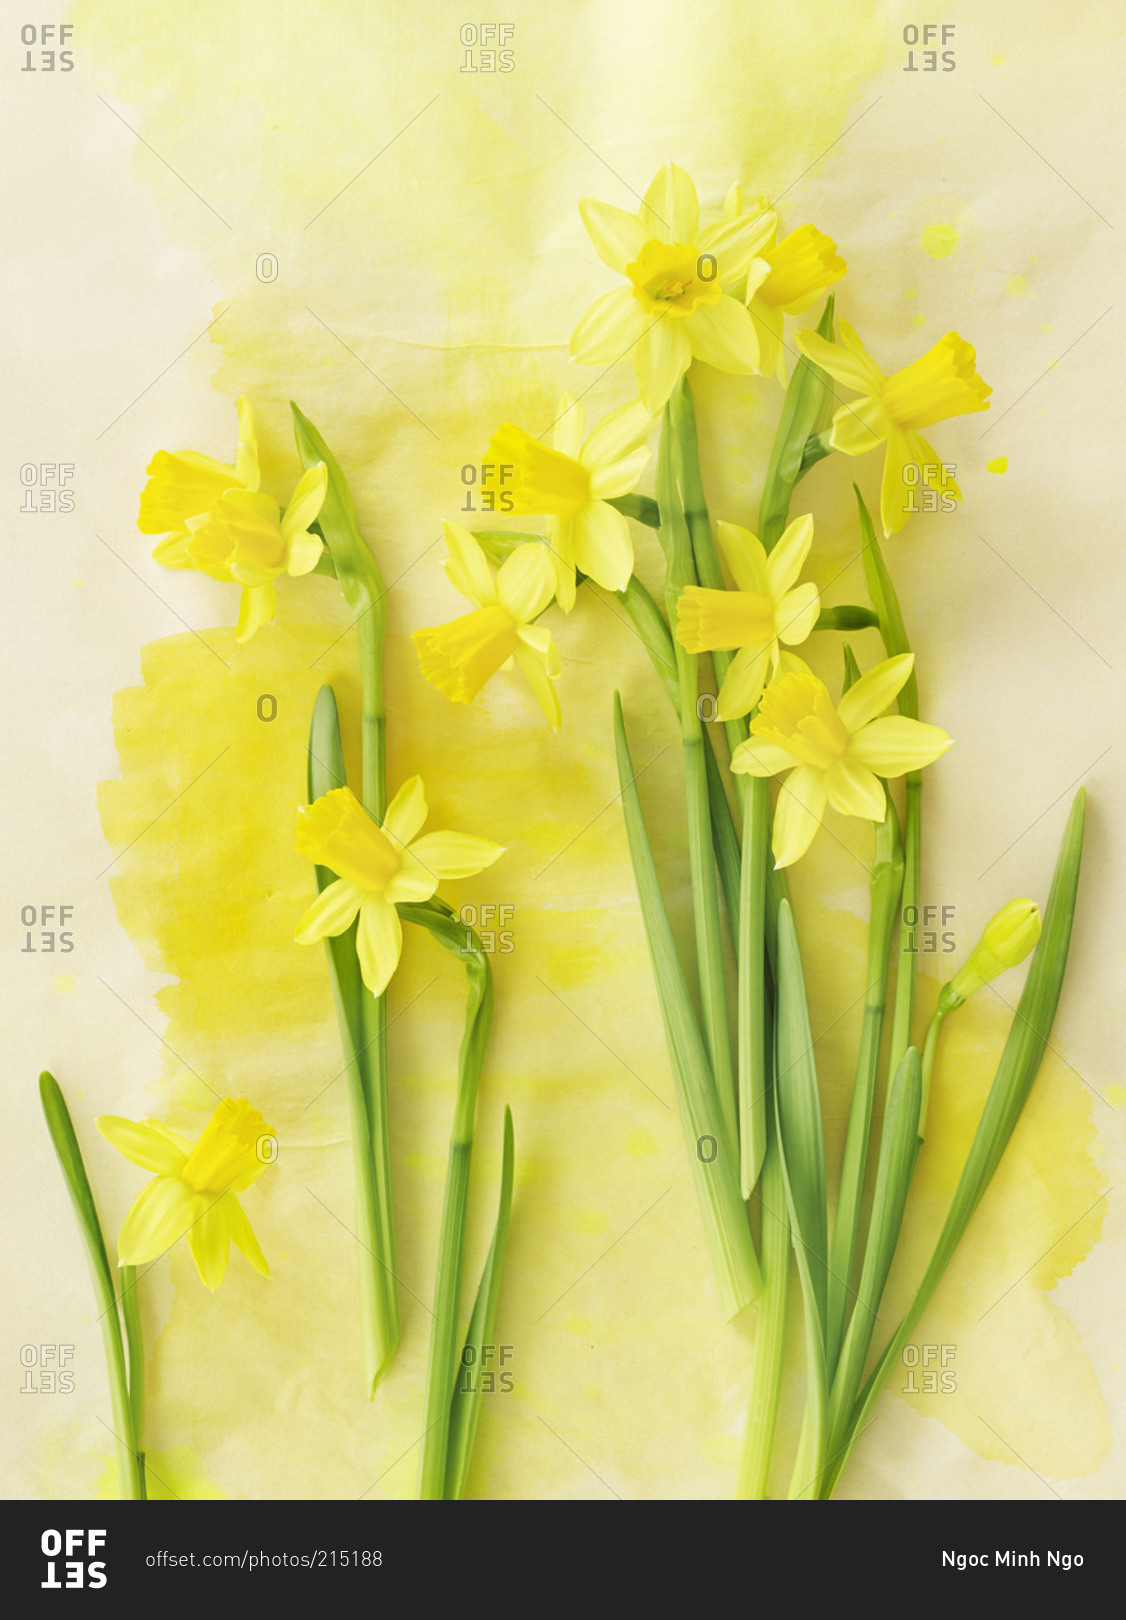 Yellow daffodils on a green background